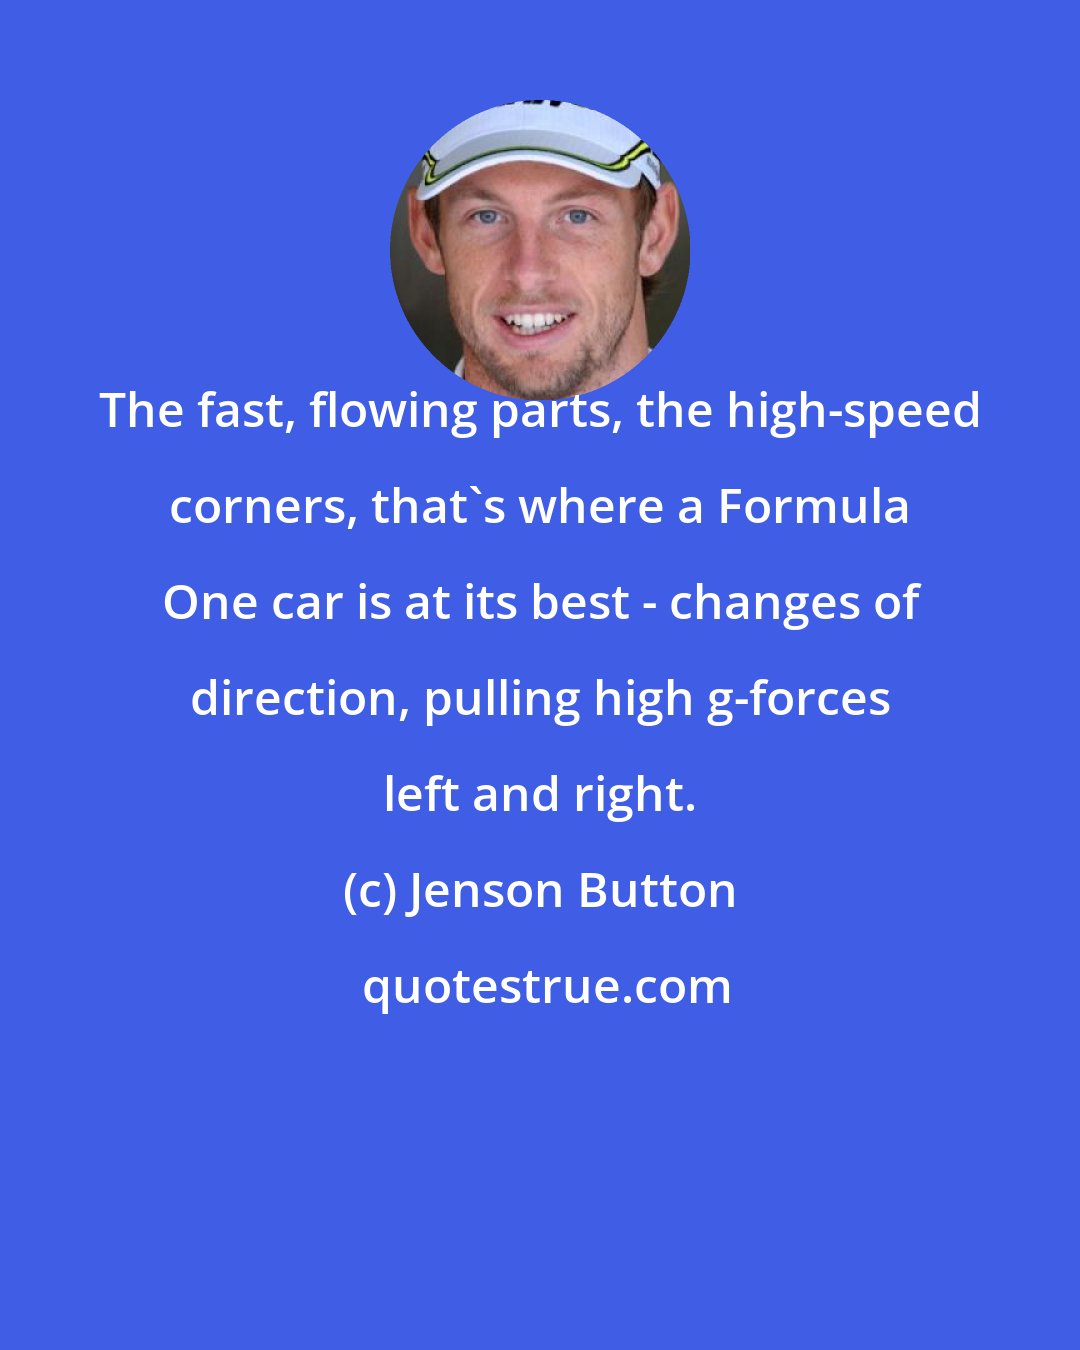 Jenson Button: The fast, flowing parts, the high-speed corners, that's where a Formula One car is at its best - changes of direction, pulling high g-forces left and right.